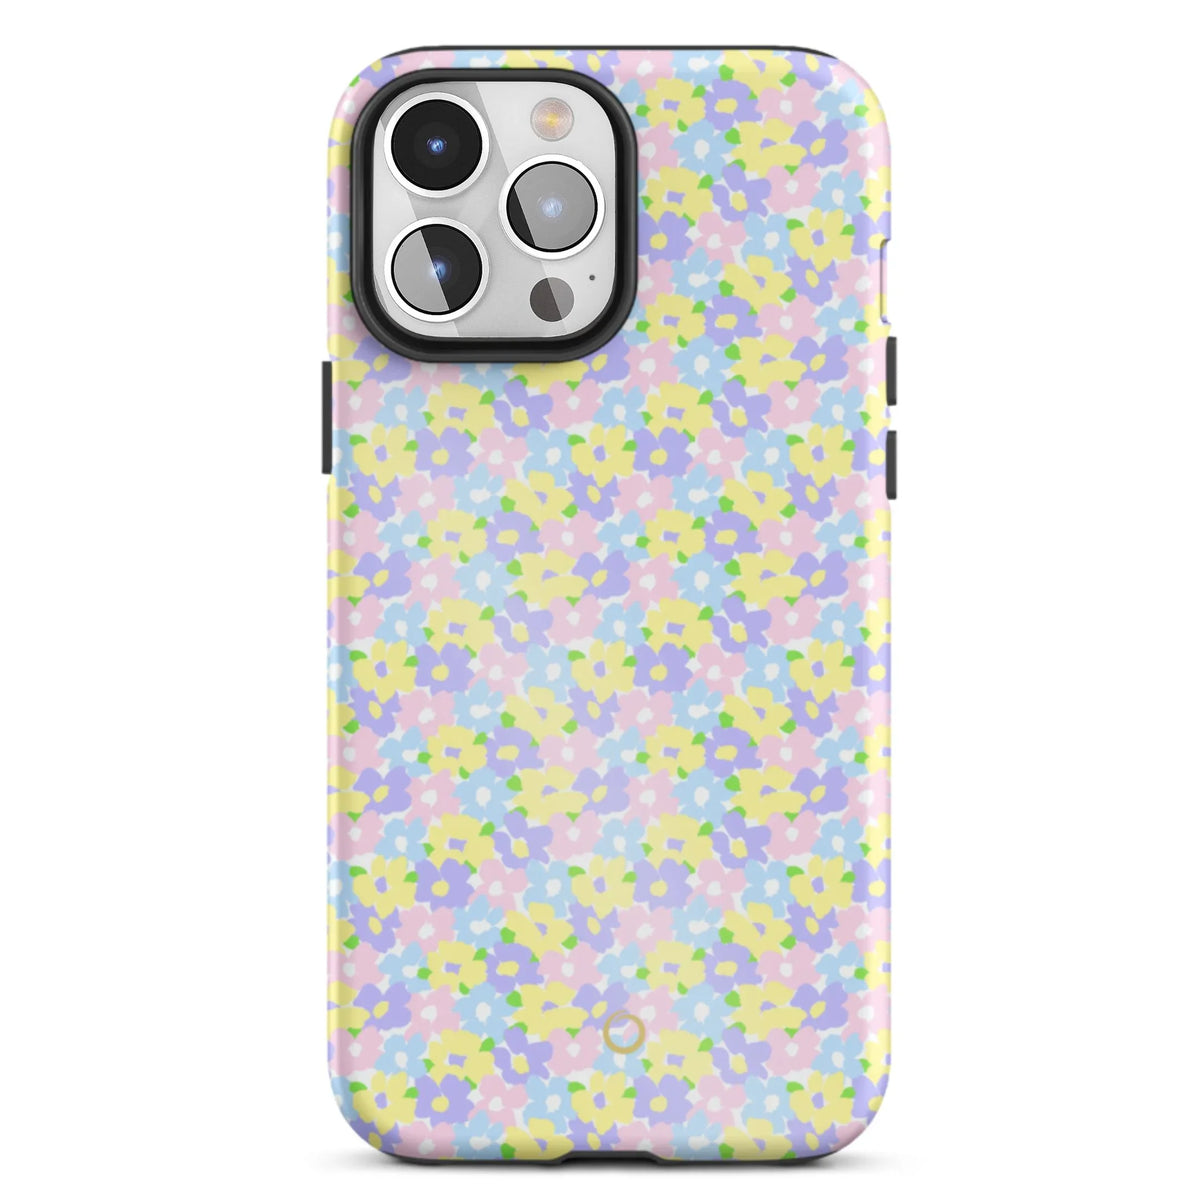 Cosmos Spring Flowers iPhone Case - iPhone 11 Pro Max